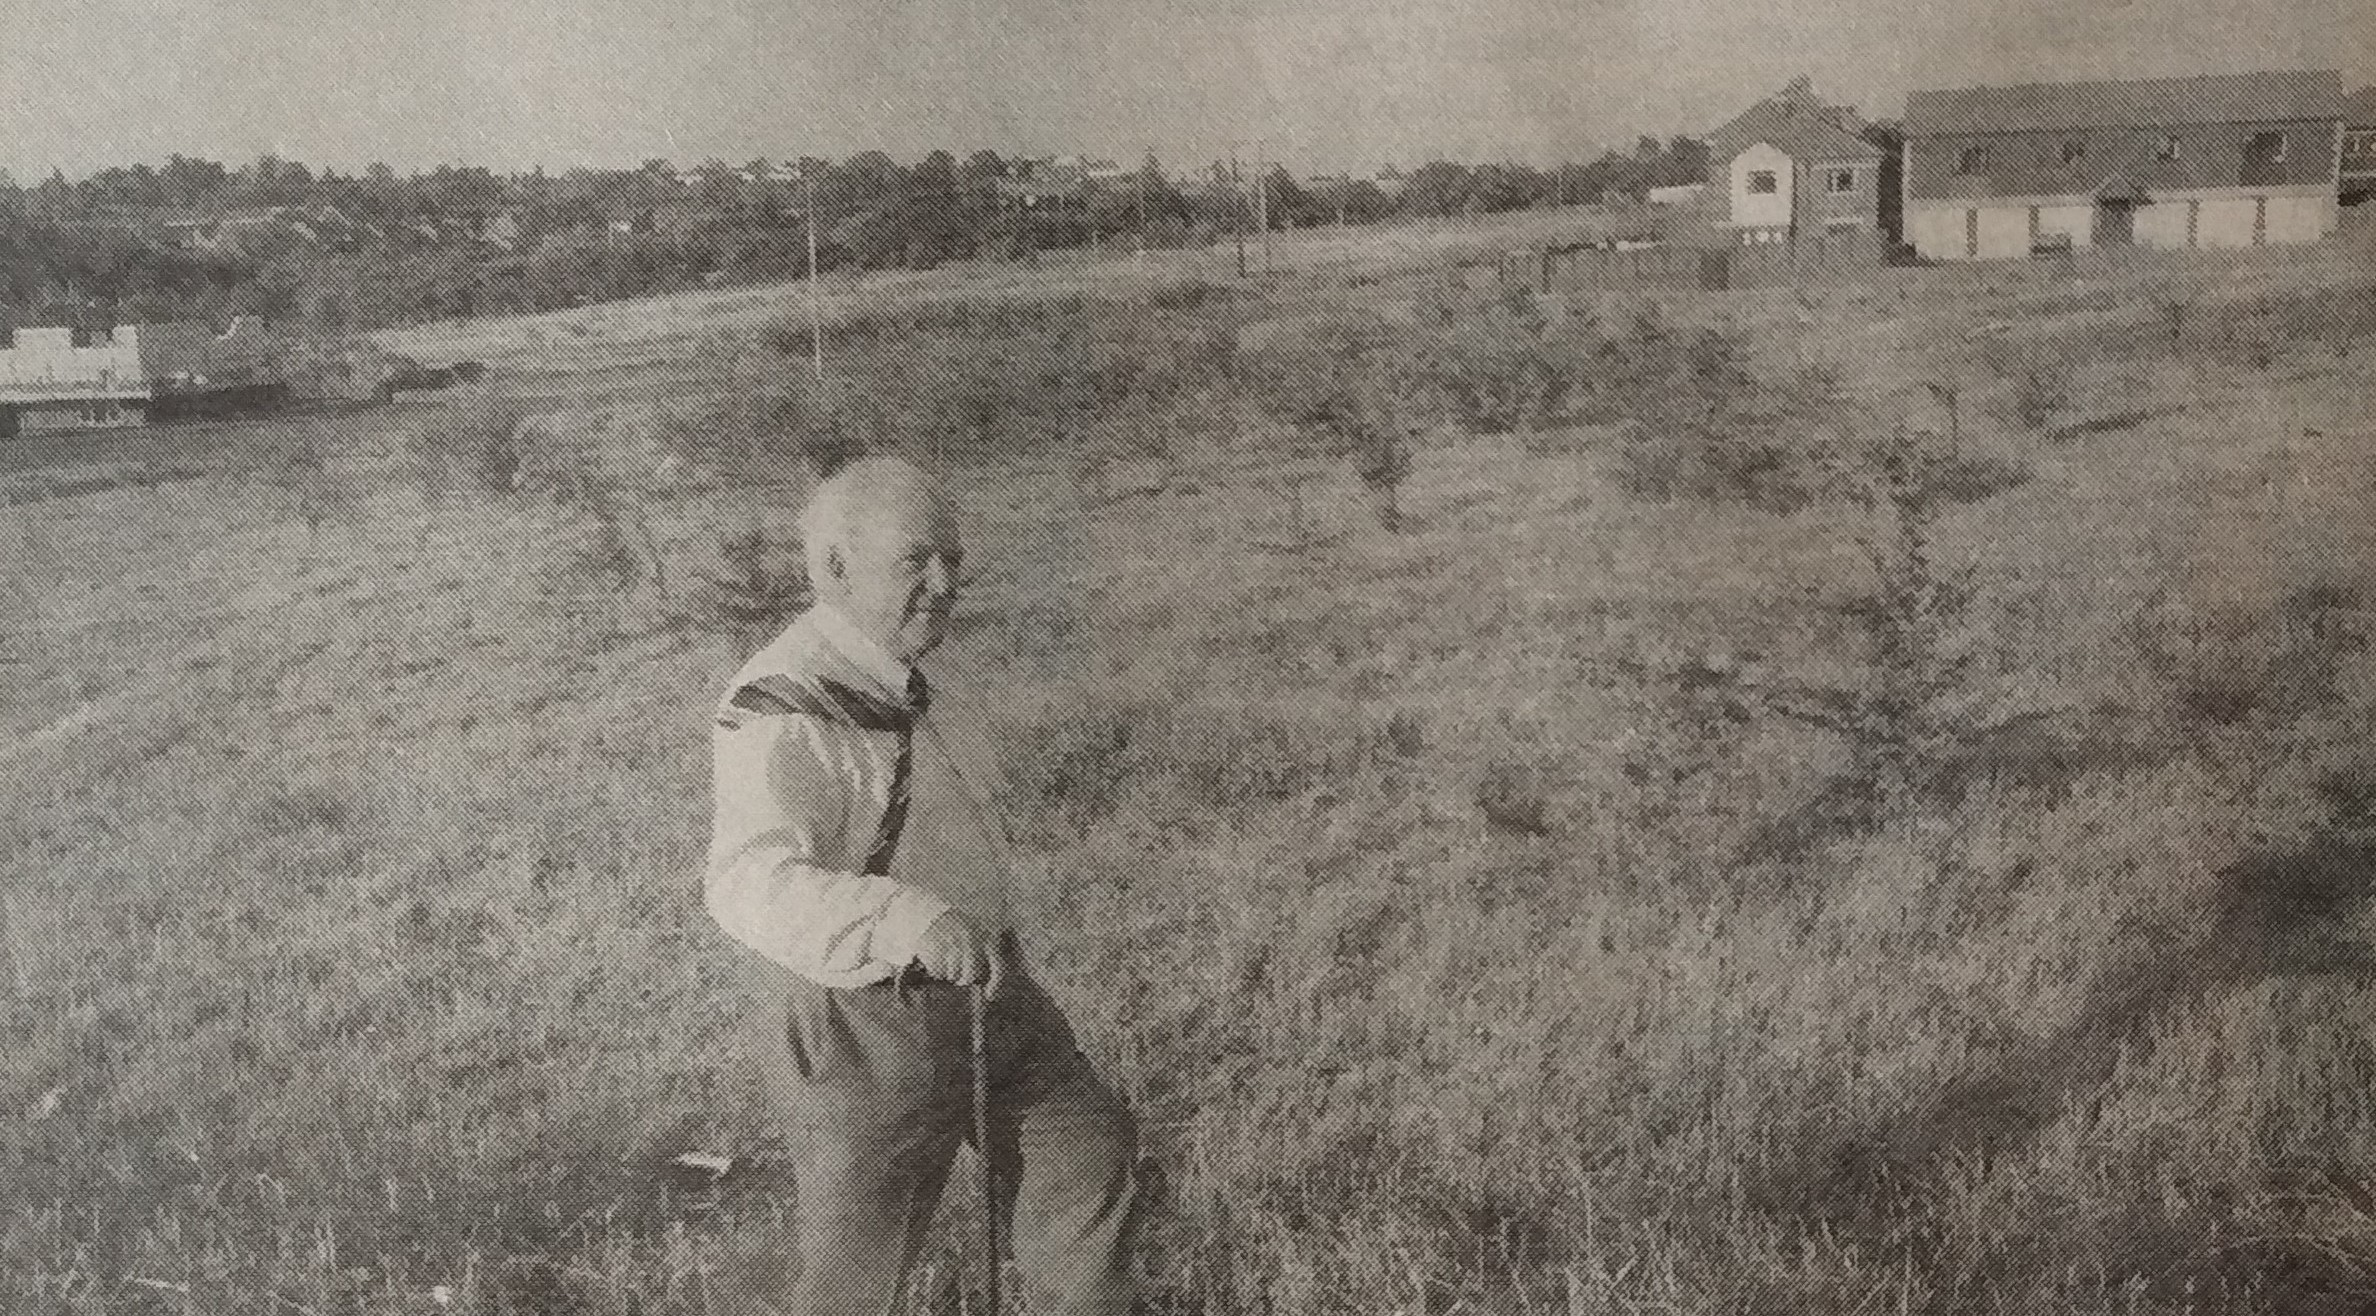 Its July 1995 and the parish council was looking to buy land on which to build a youth centre. Parish councillor Donald Anderton is pictured on the land, close to the Tesco site